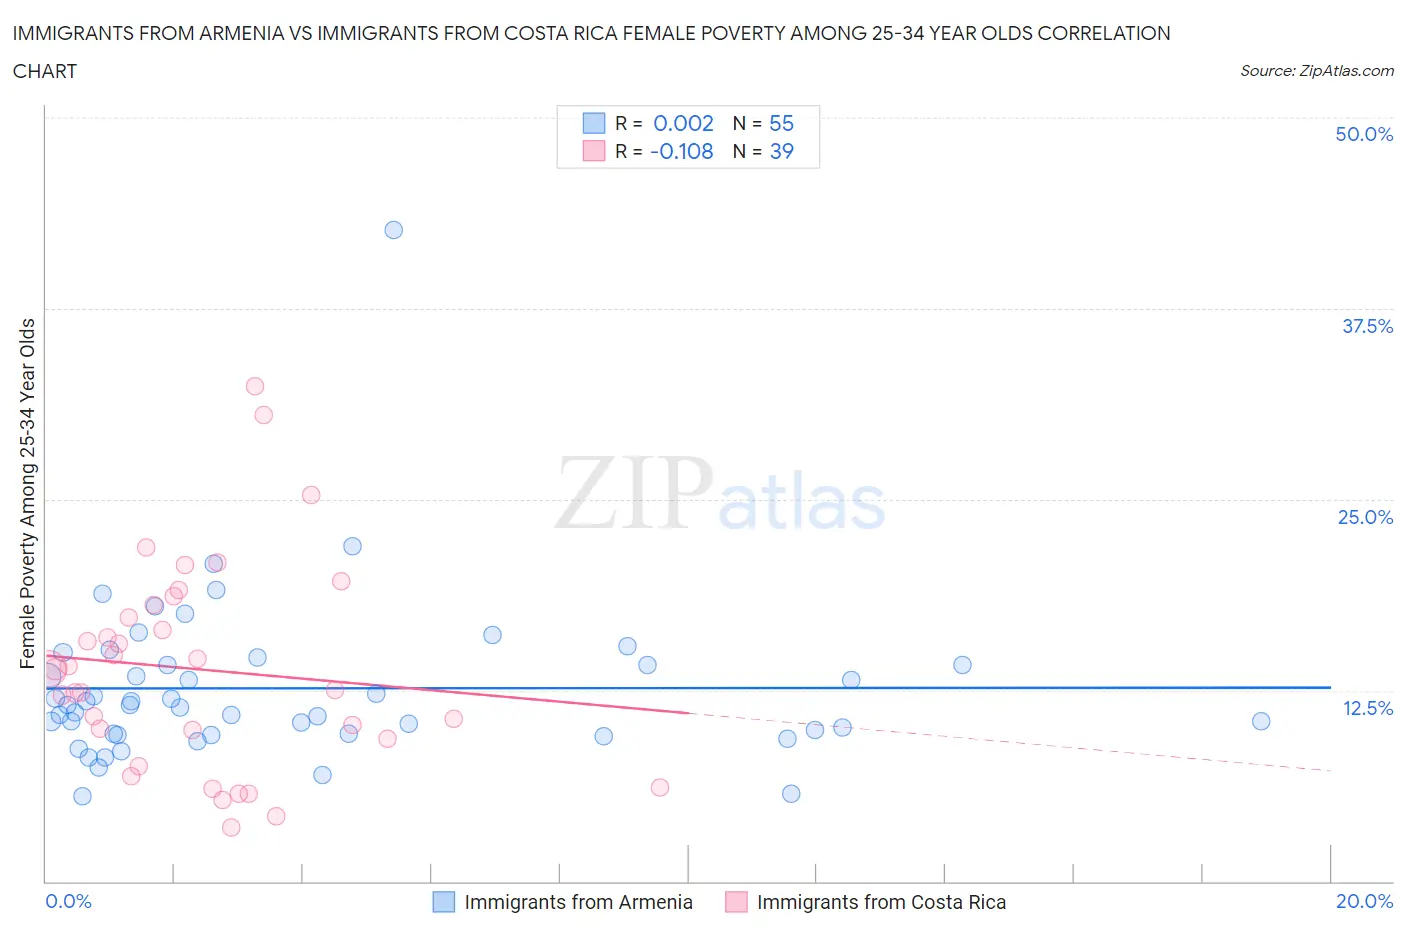 Immigrants from Armenia vs Immigrants from Costa Rica Female Poverty Among 25-34 Year Olds